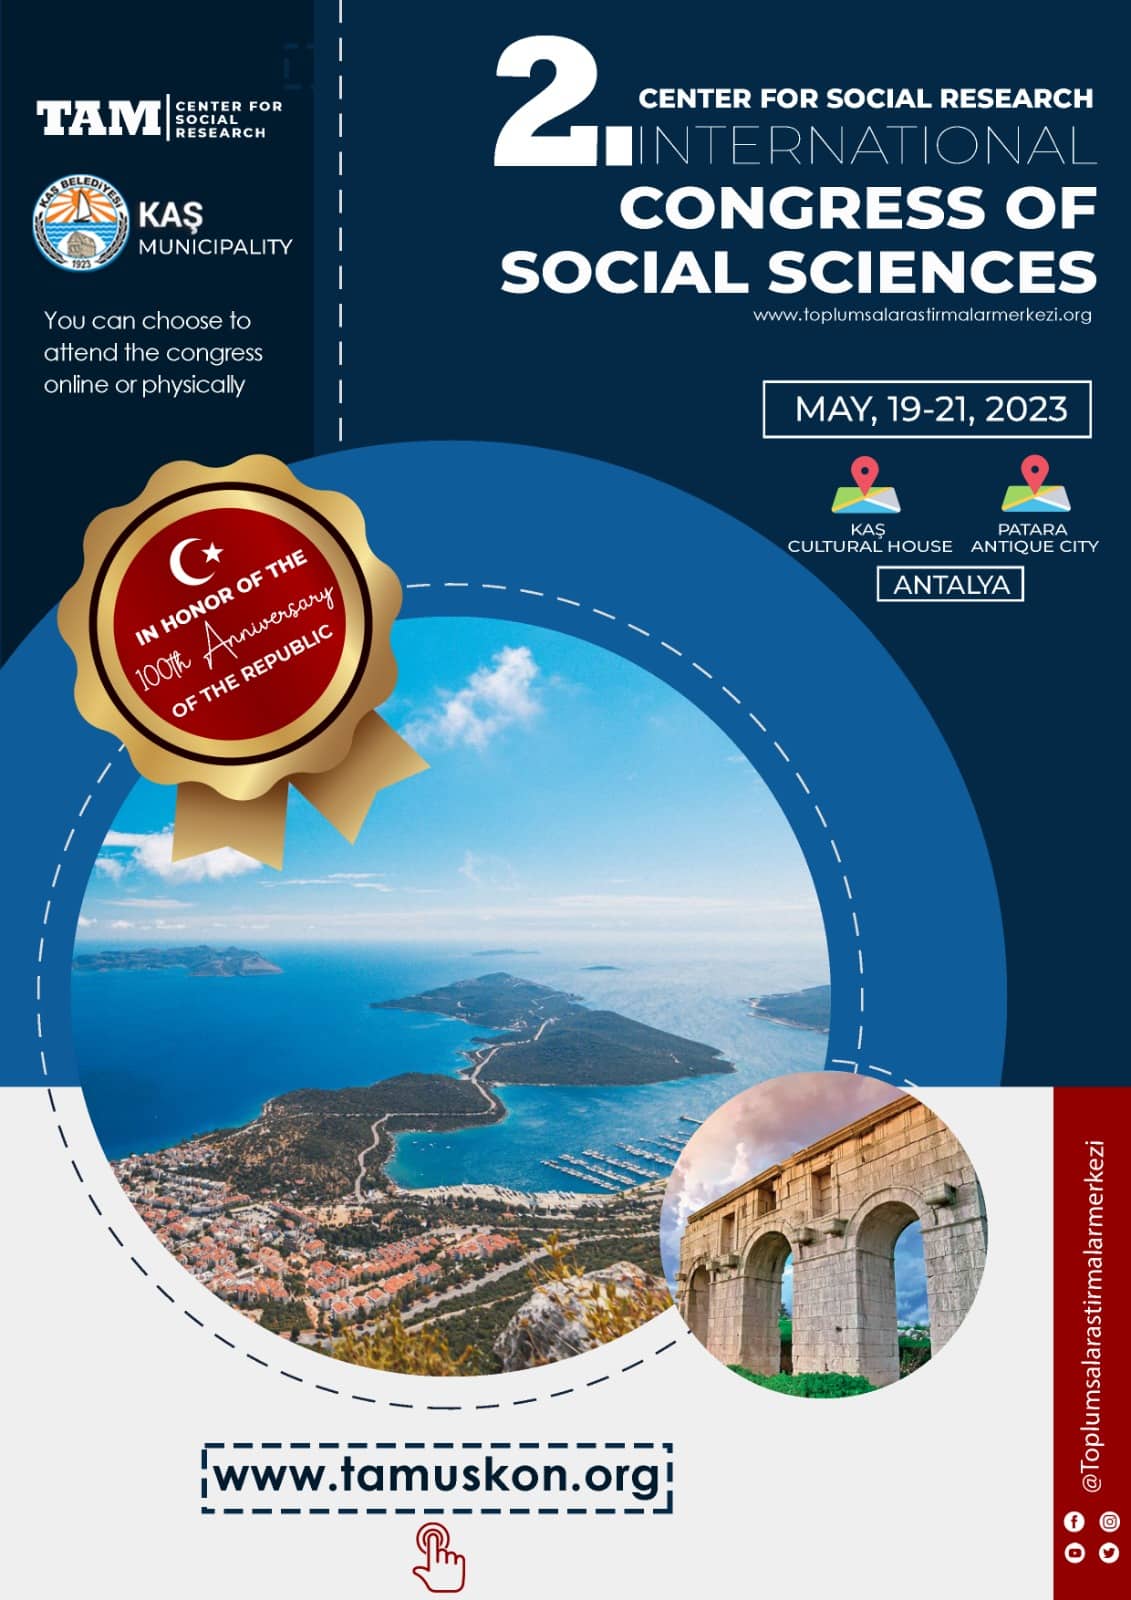 Center for Social Research 2nd International Congress of Social Sciences